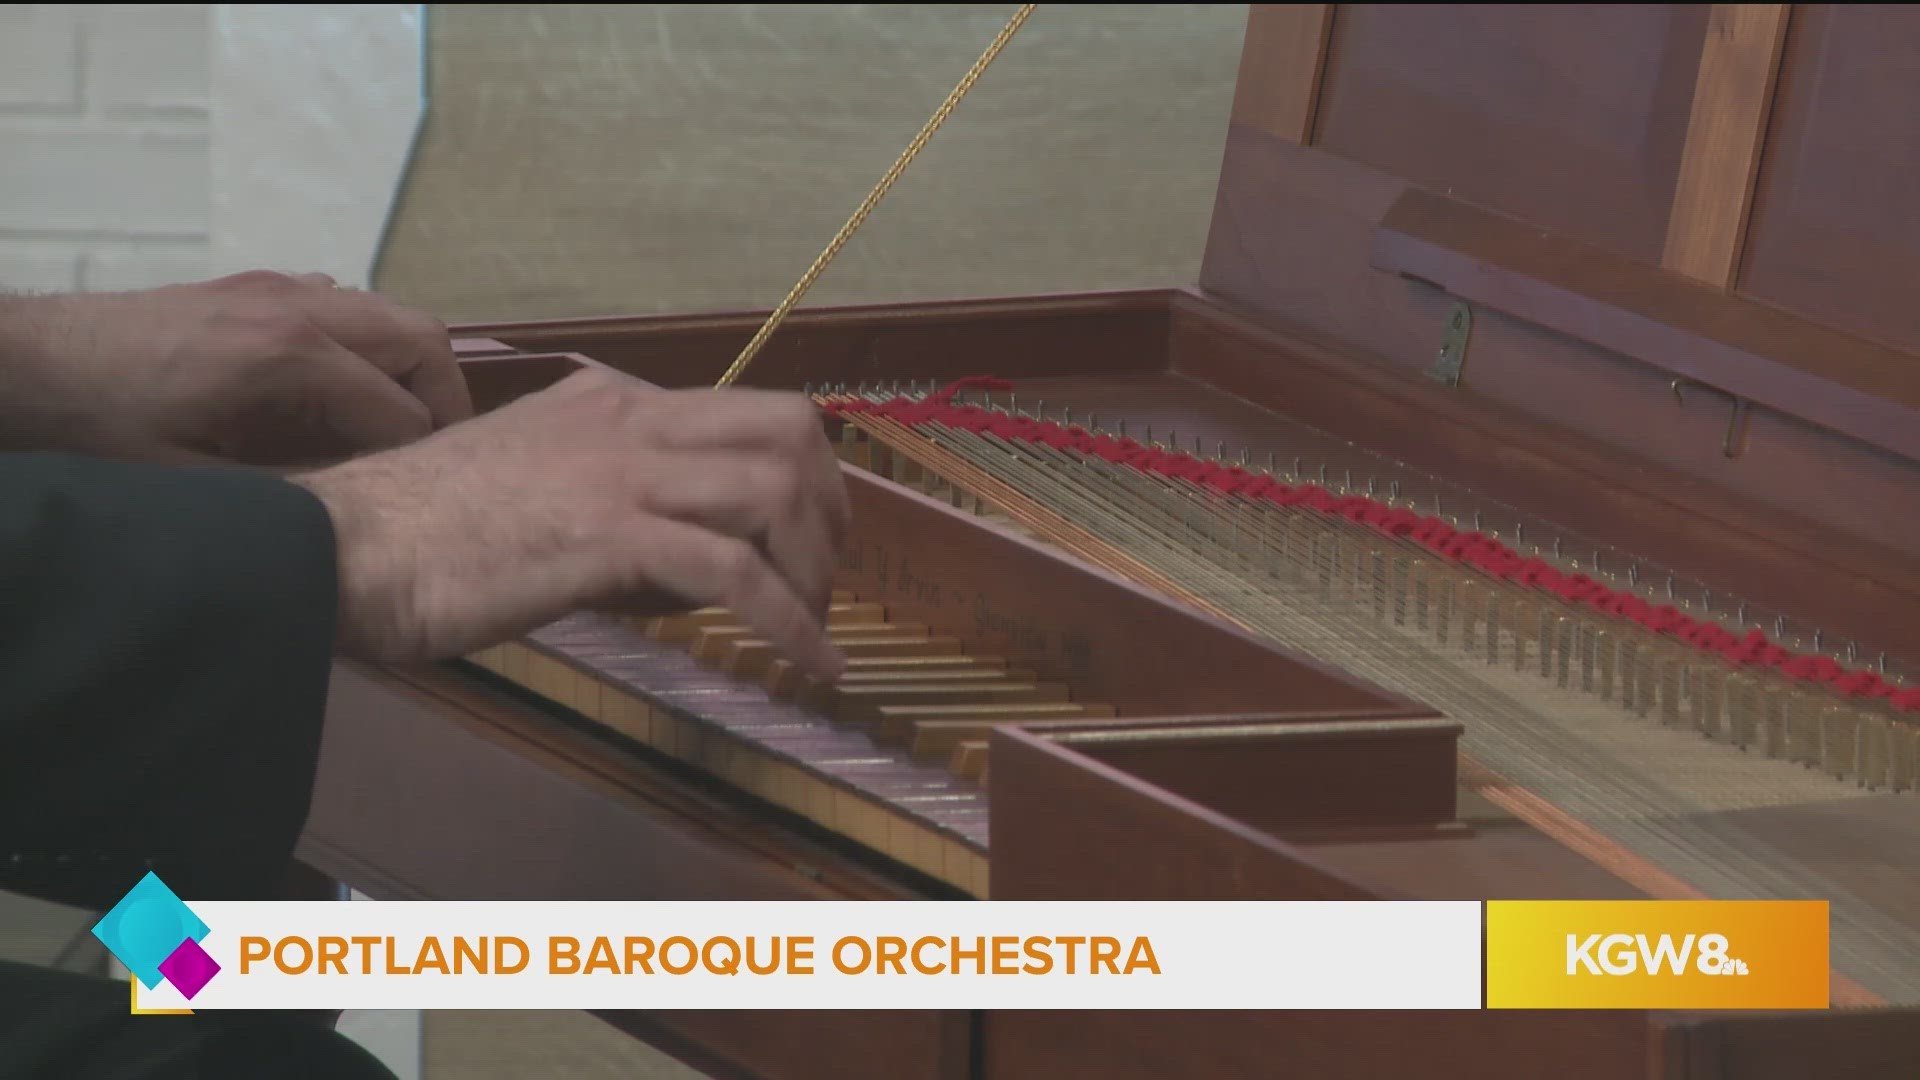 Artistic Director Julian Perkins played part of a piece by Bach on the clavichord